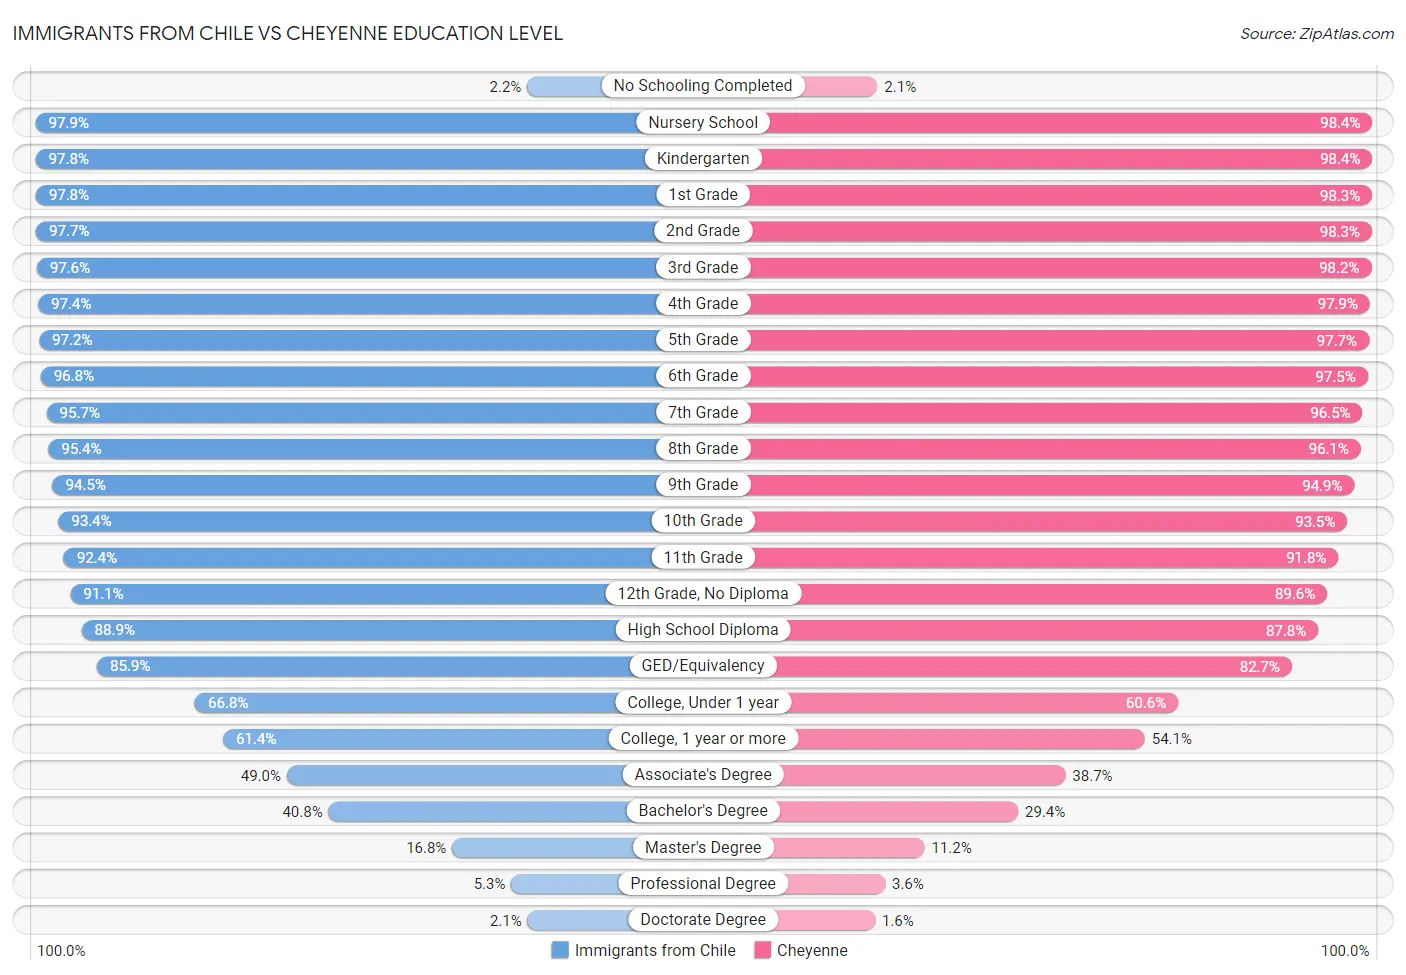 Immigrants from Chile vs Cheyenne Education Level